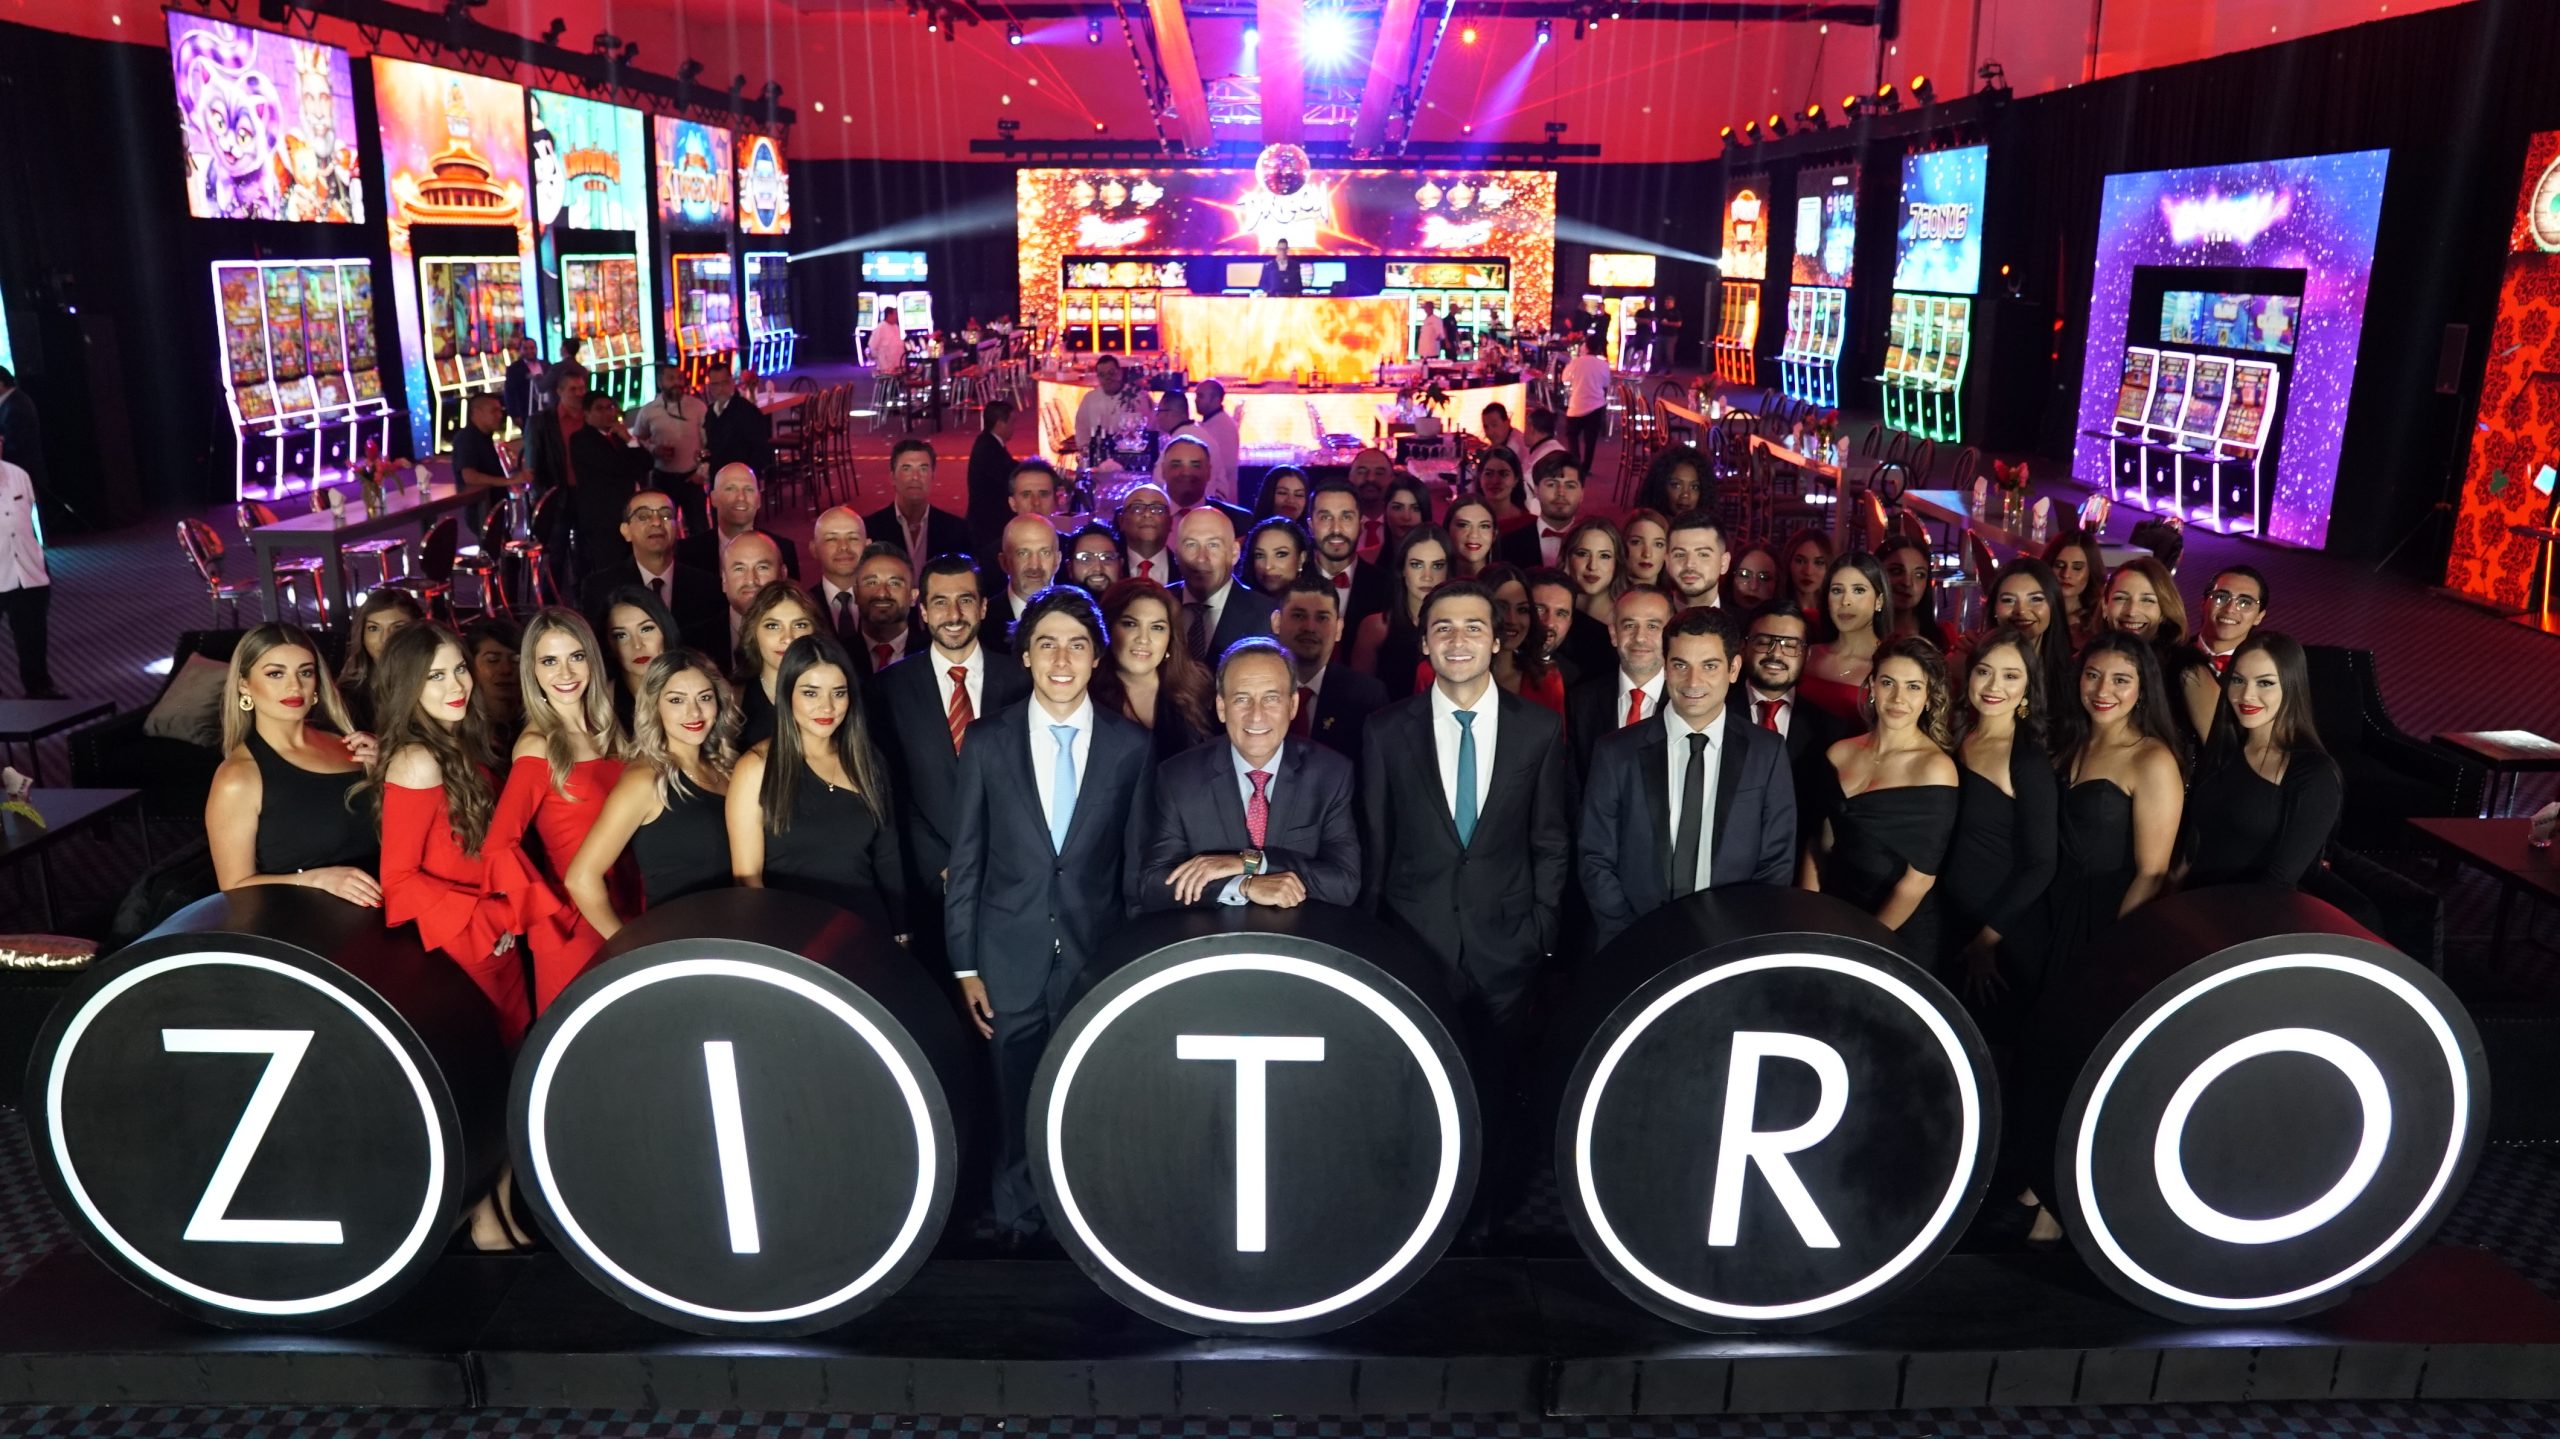 zitro-reaffirmed-its-commitment-to-the-mexican-gaming-industry-with-its-prestigious-zitro-experience-event